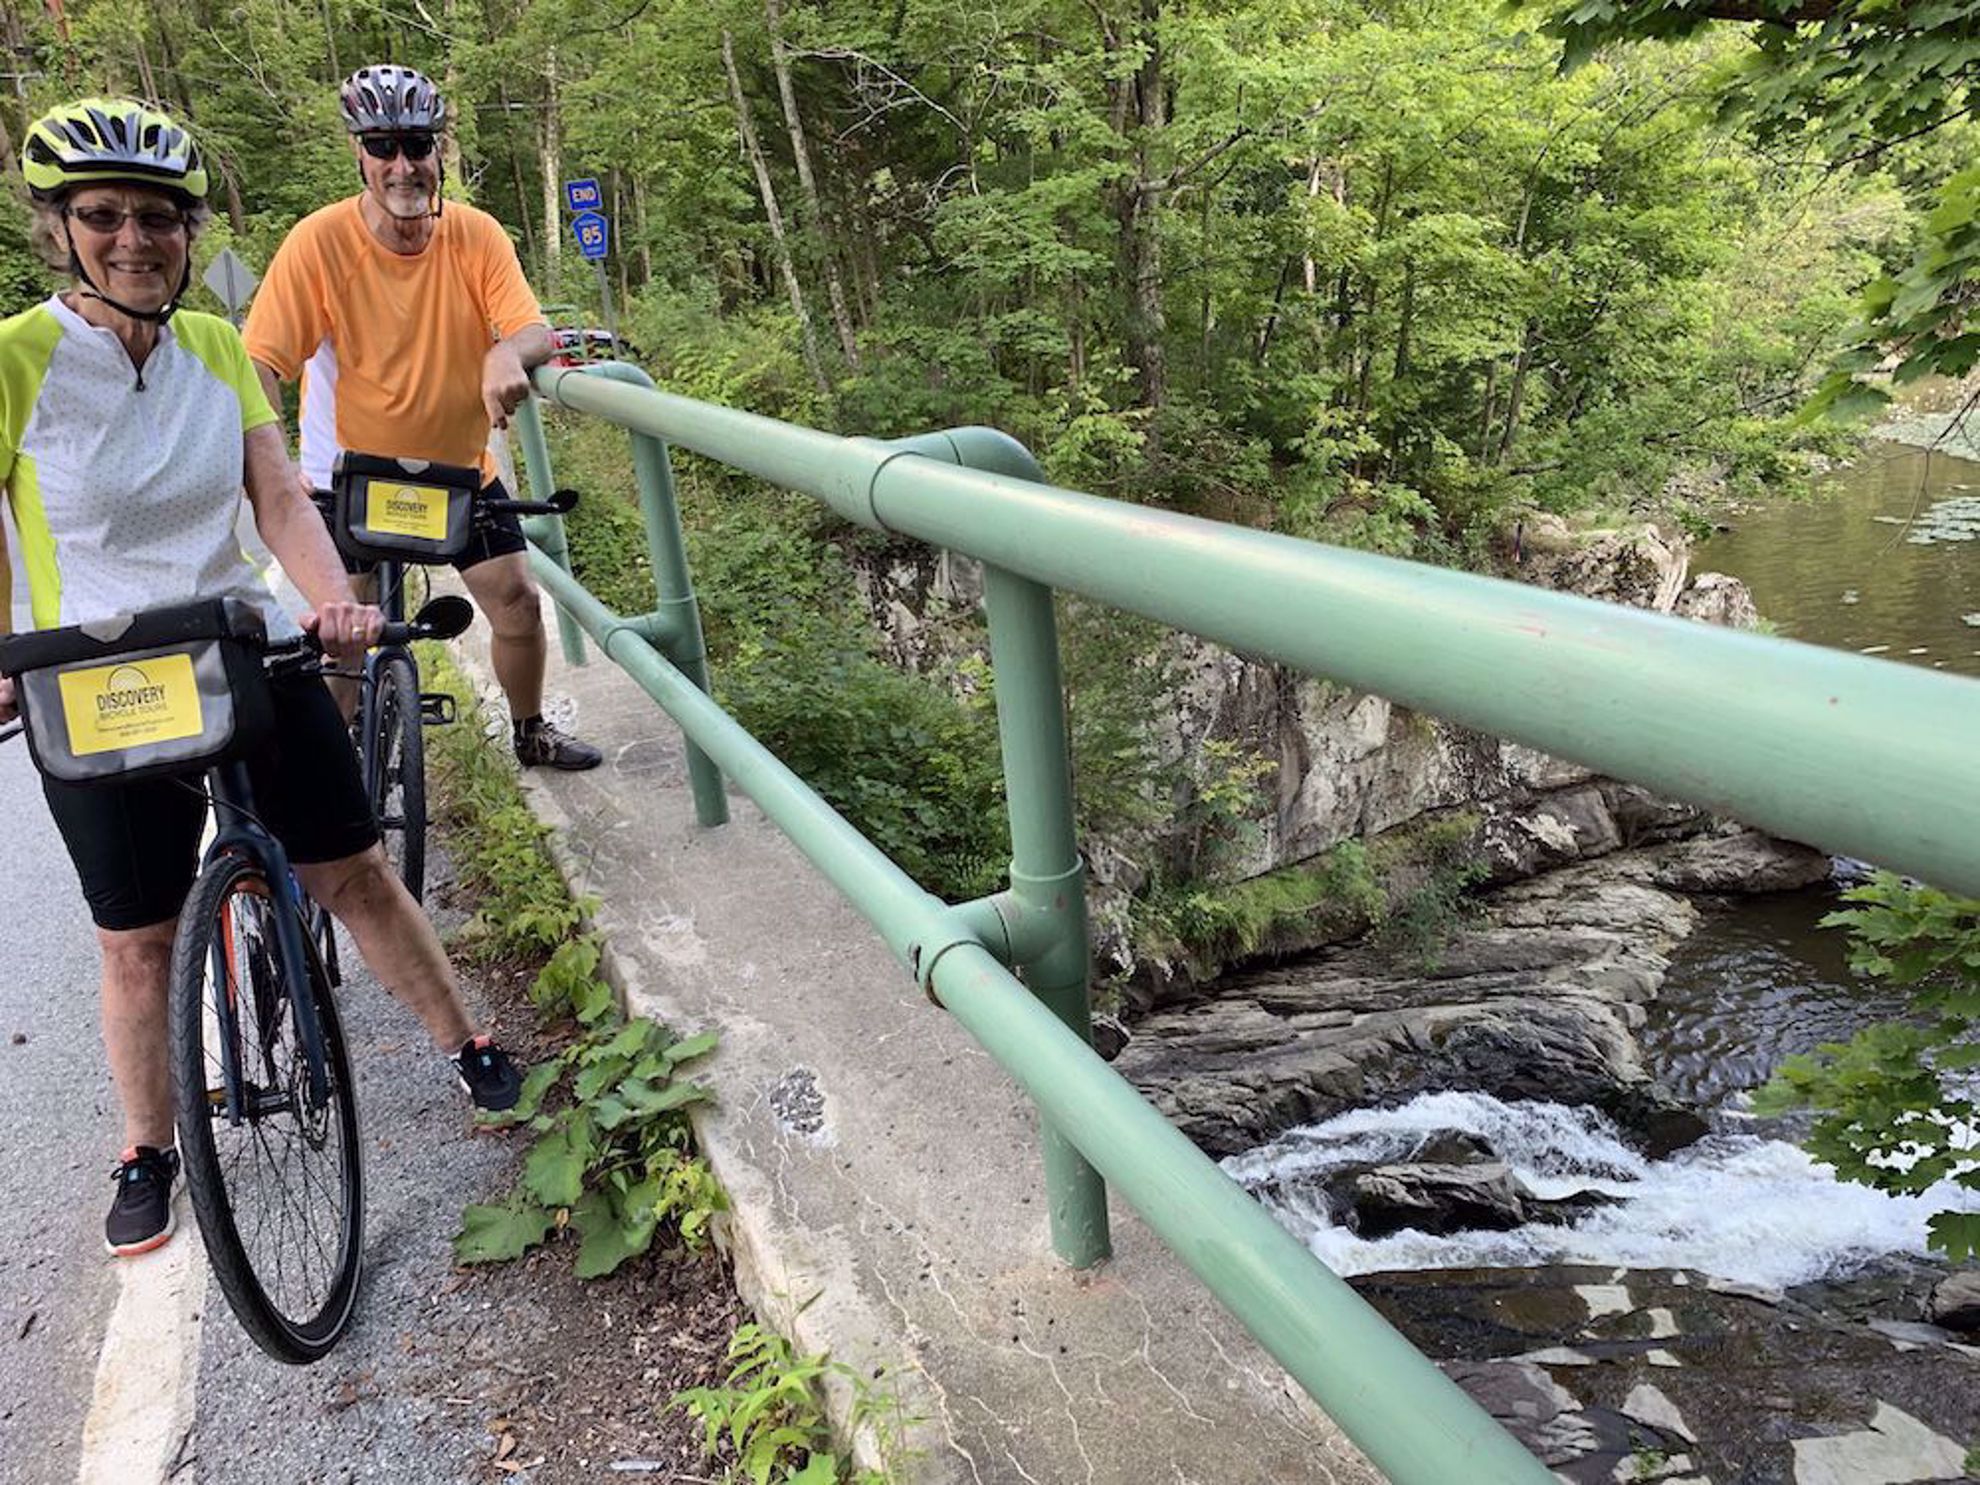 Empire State Rail Trail: Discover Scenic Paths & History!